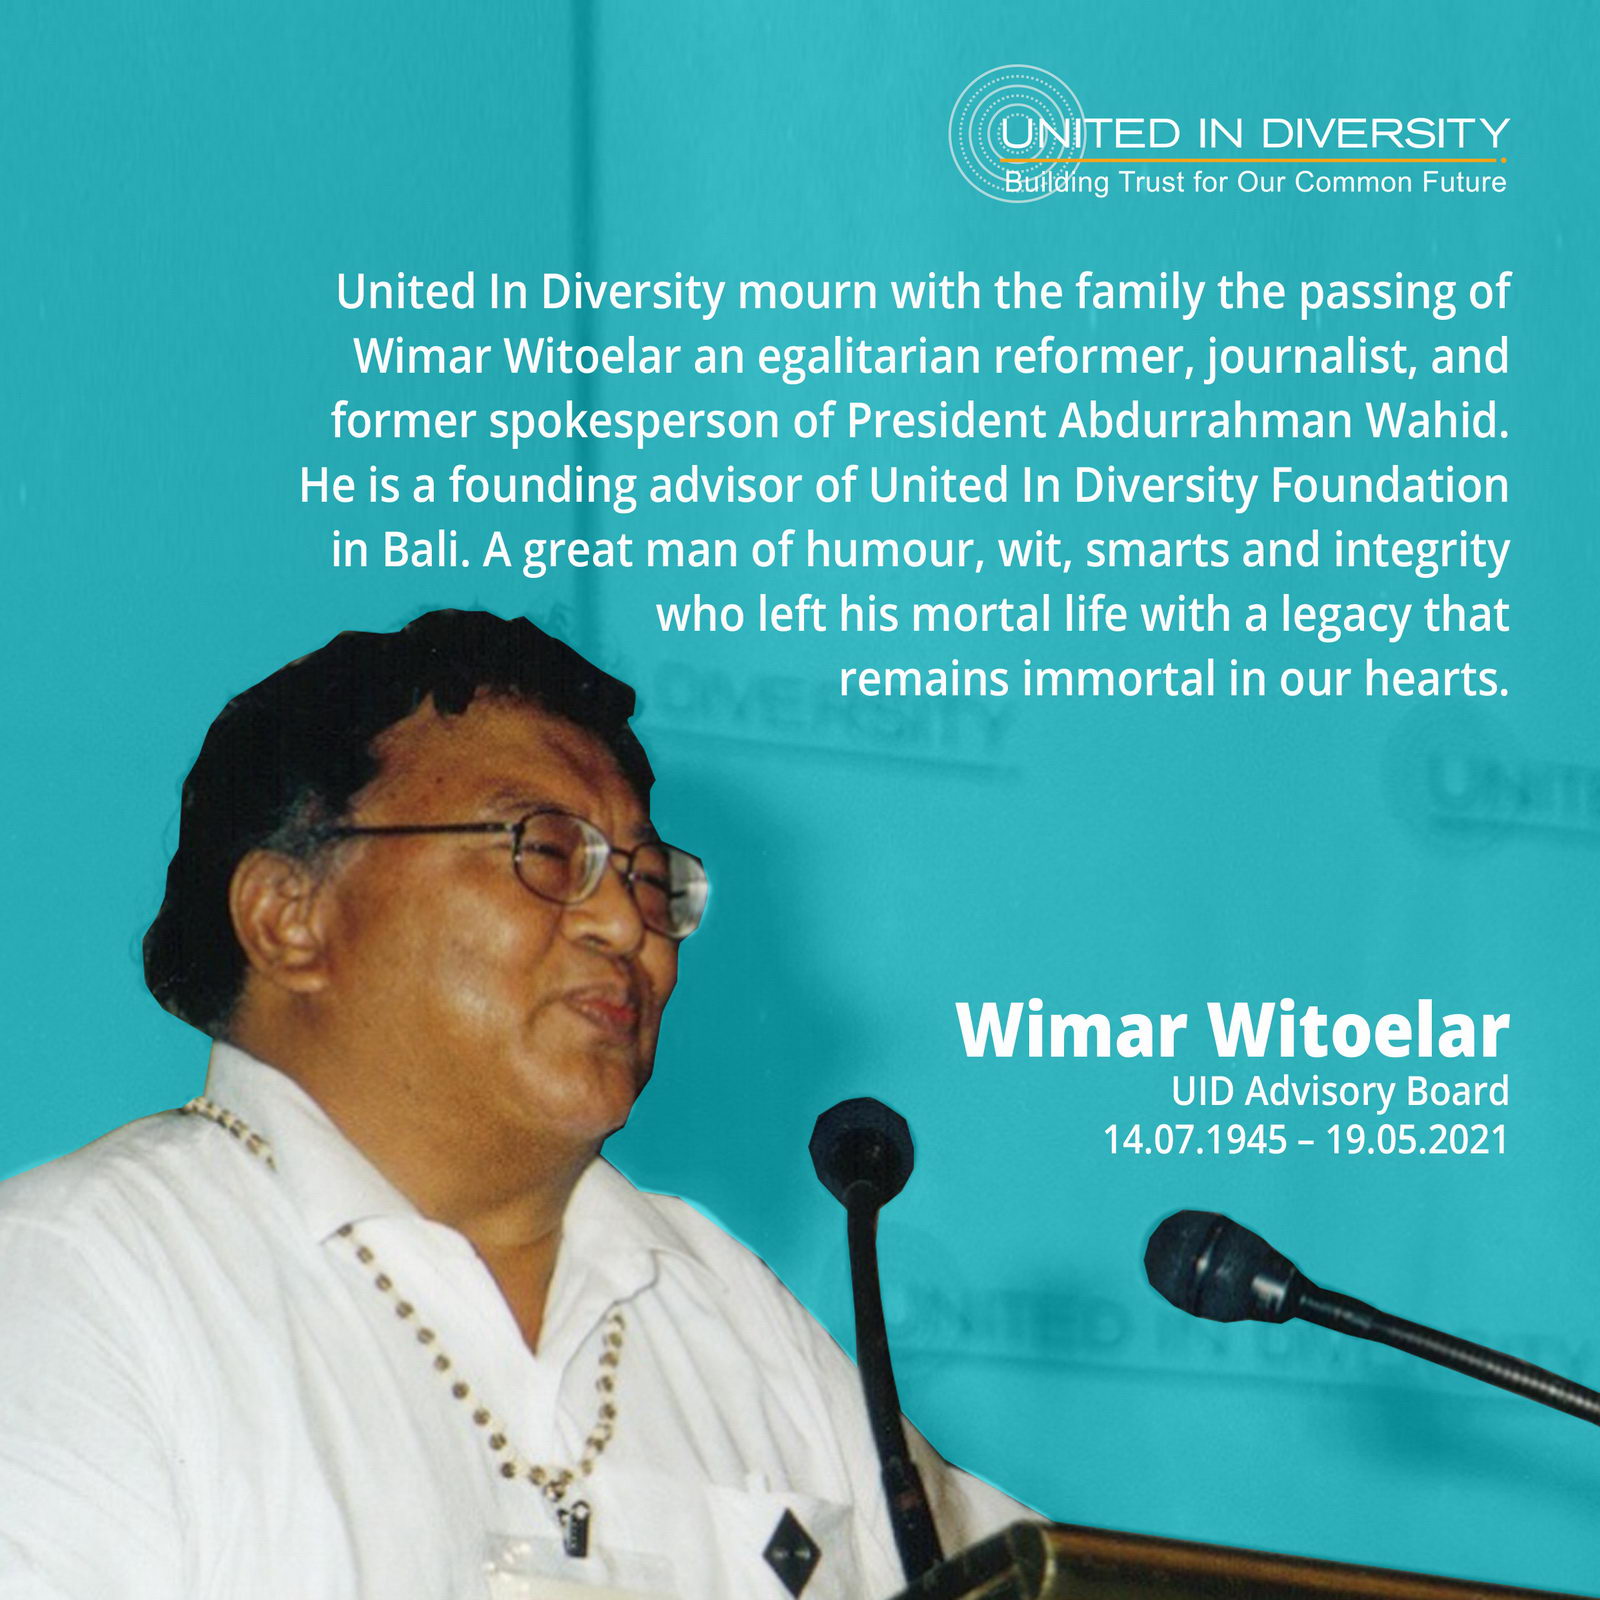 Our Deepest Condolences on the passing of Wimar Witoelar